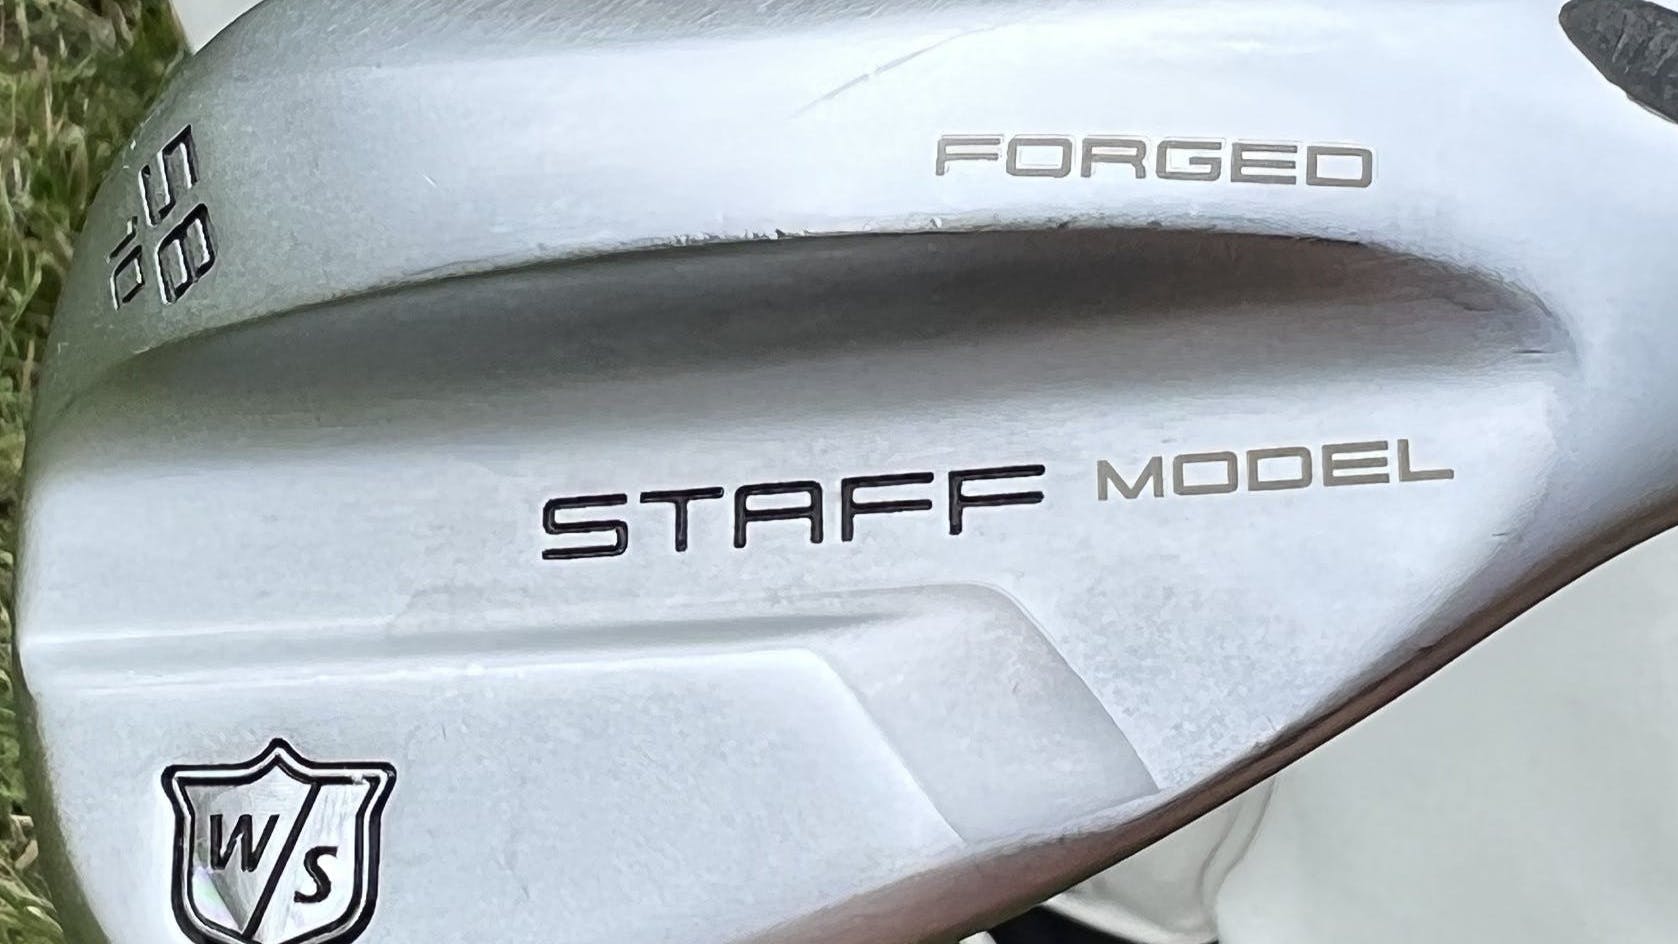 The Wilson Staff Model Tour Grind Wedge.